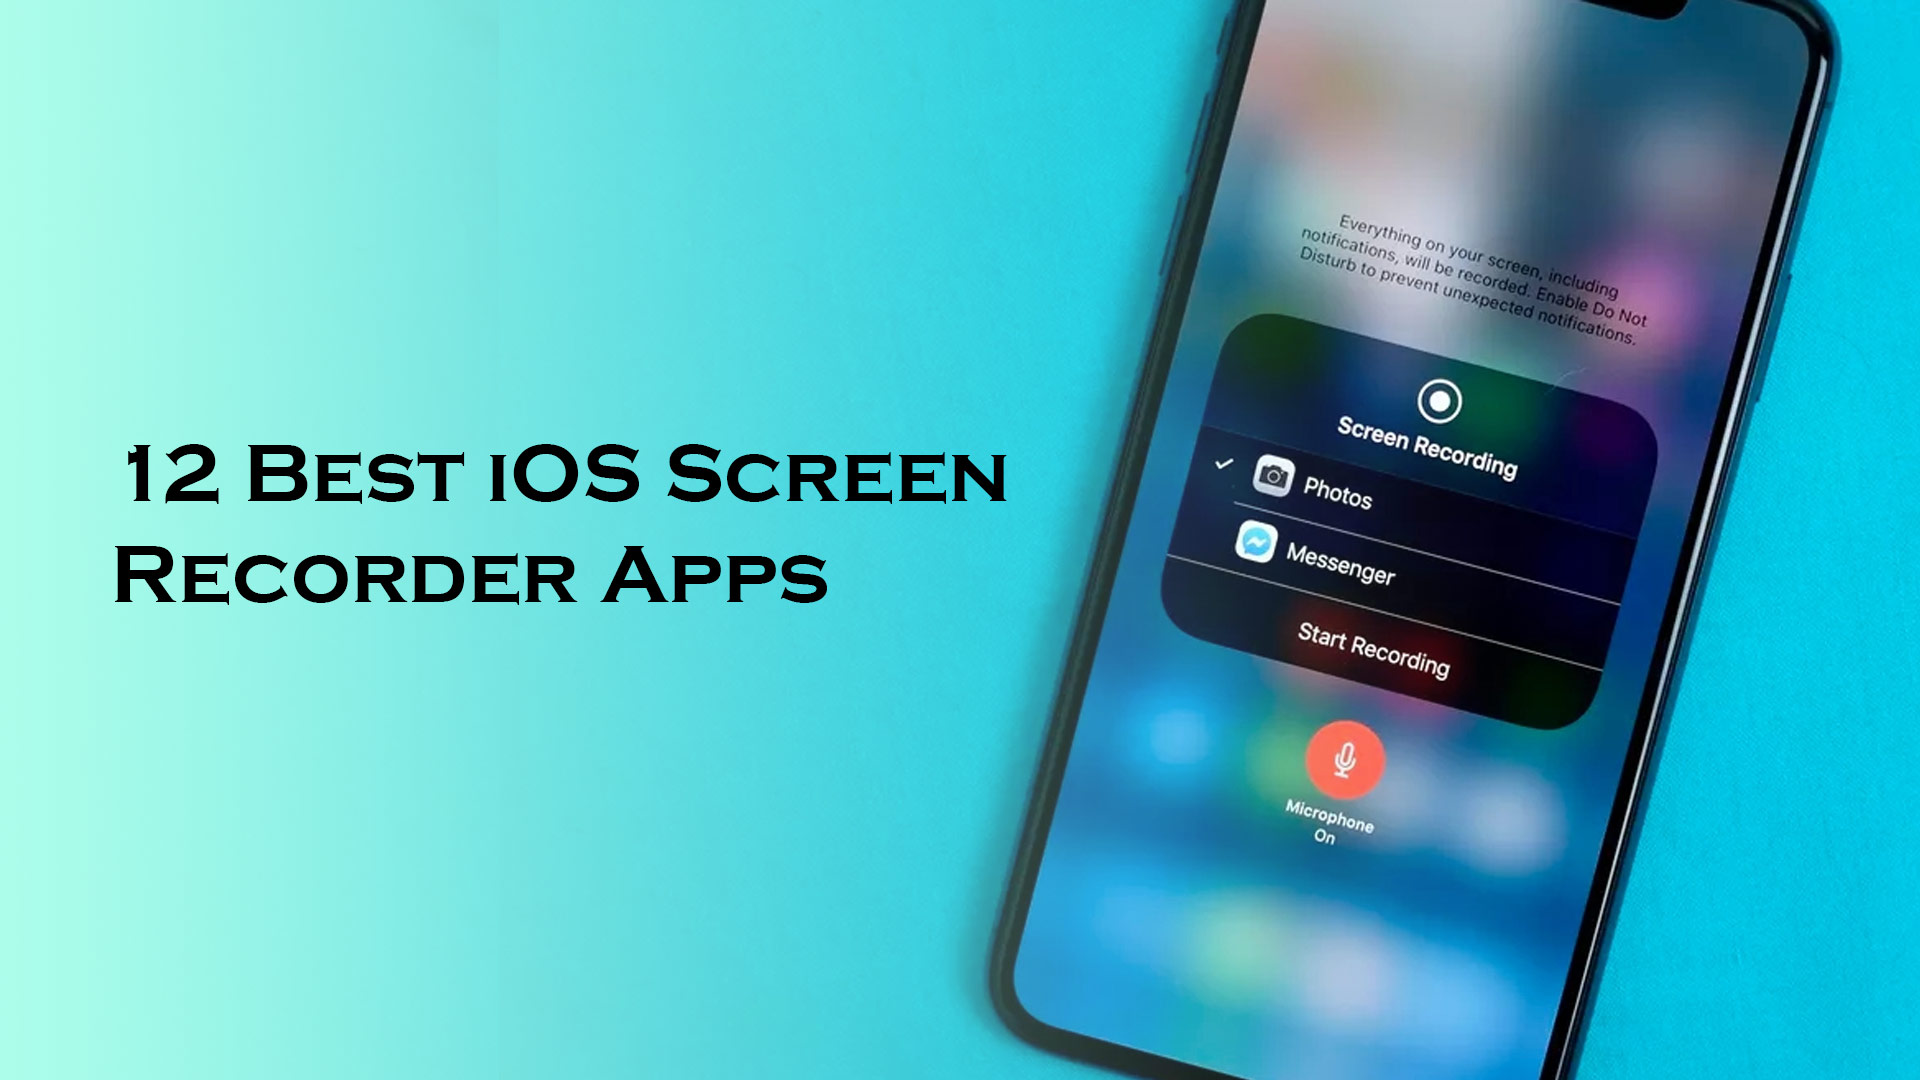 12 Best iOS Screen Recorder Apps to Record your iPhone and iPad